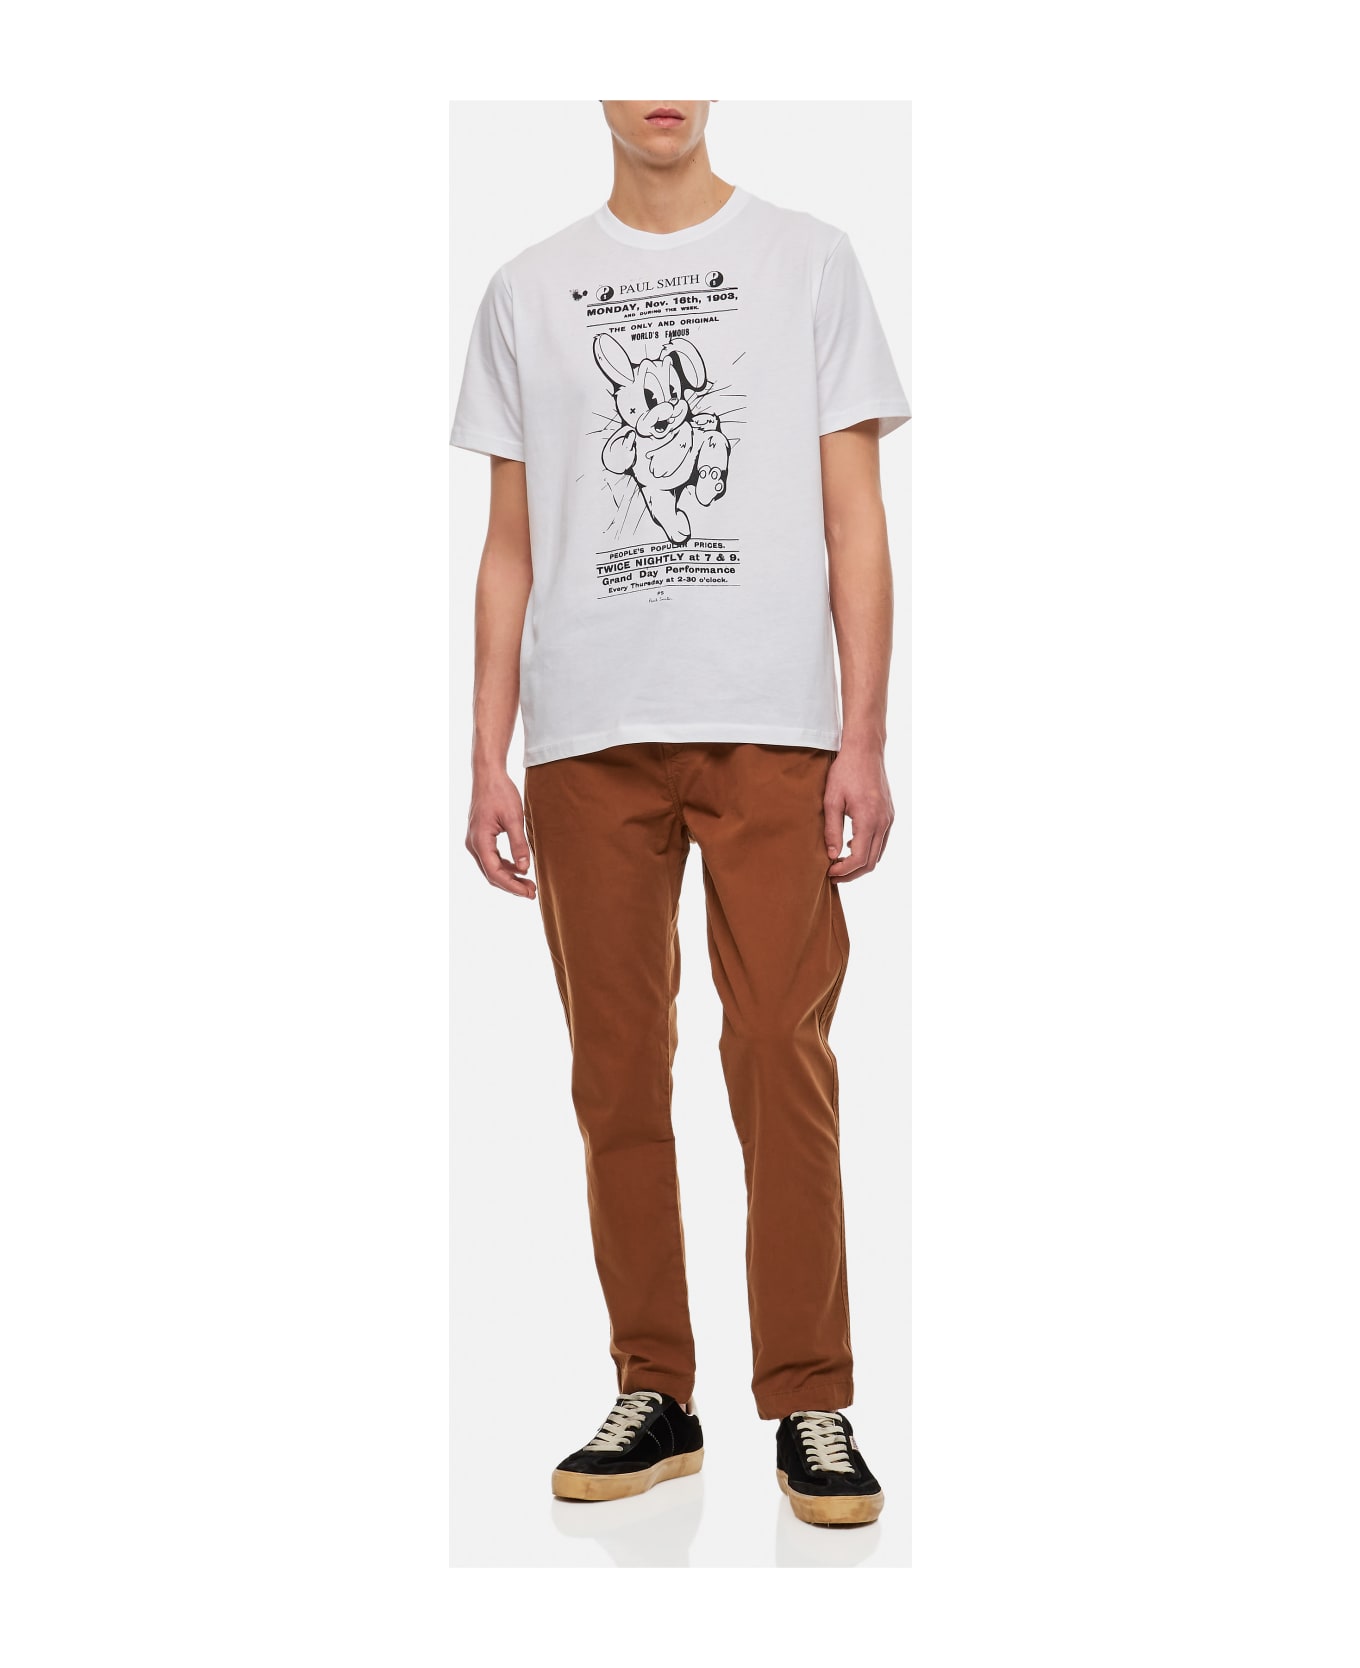 PS by Paul Smith Rabbit Poster T-shirt - White シャツ